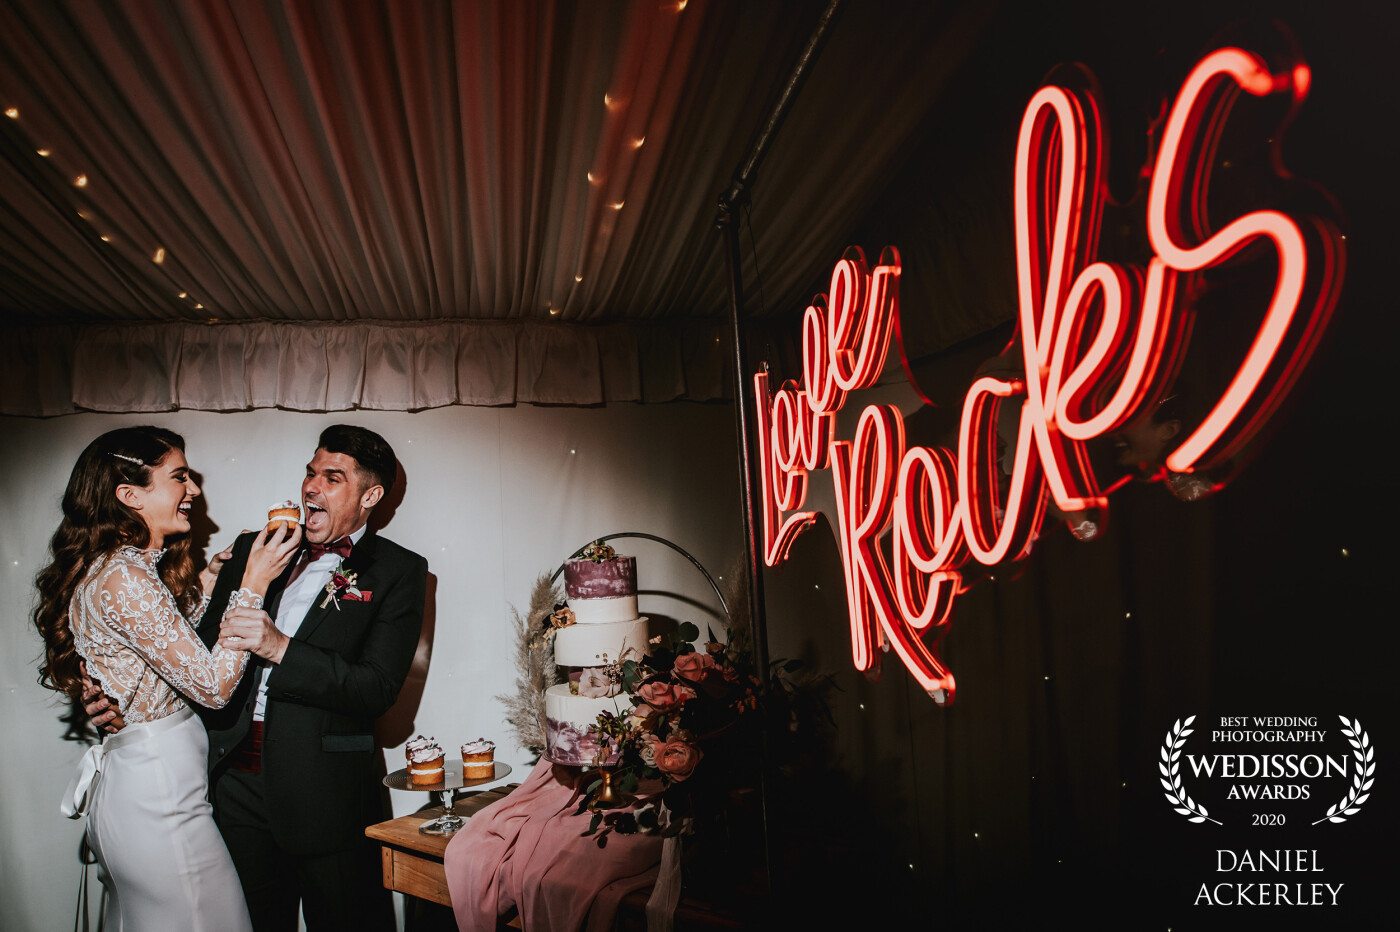 This photograph of Silvanna & Tom was captured at Chippenham Park in the UK, I really wanted to make sure the Love Rocks neon sign was properly exposed, so before the cake cutting I put a light up to expose the couple and not spill onto the sign, and it worked perfectly! The fact they were messing about just made the moment even better :-)